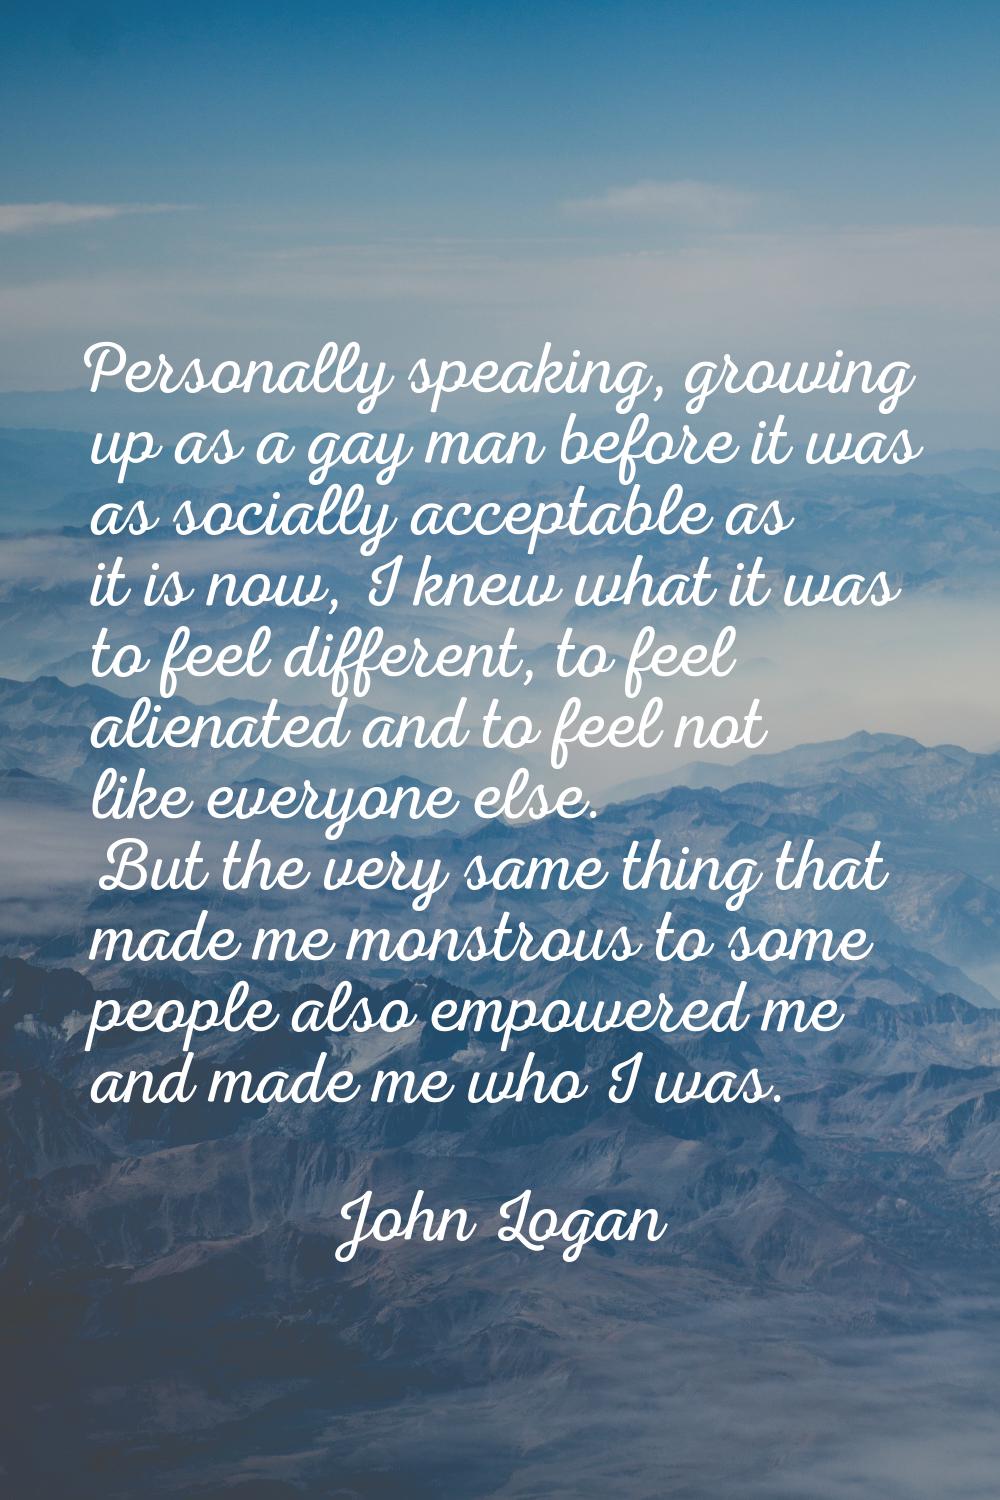 Personally speaking, growing up as a gay man before it was as socially acceptable as it is now, I k